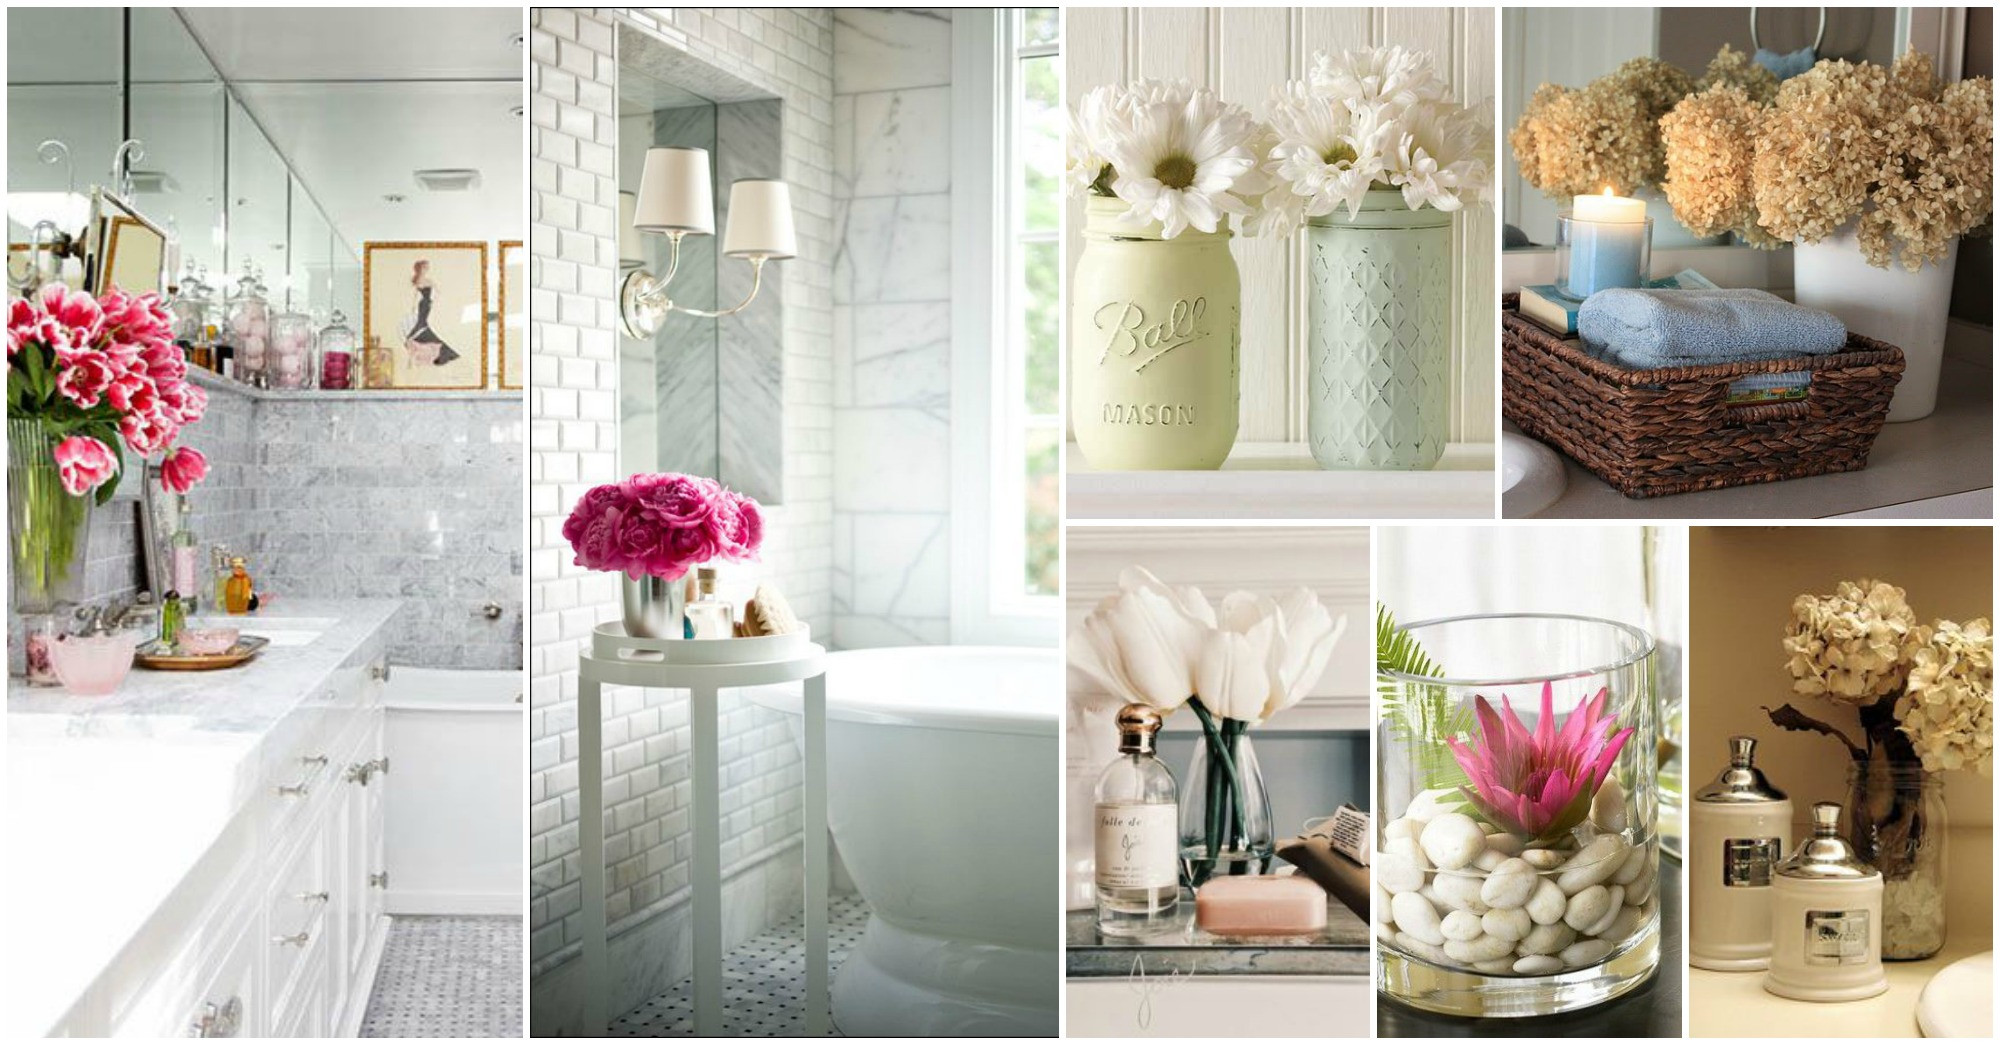 Images Of Bathroom Decor
 Relaxing Flowers Bathroom Decor Ideas That Will Refresh